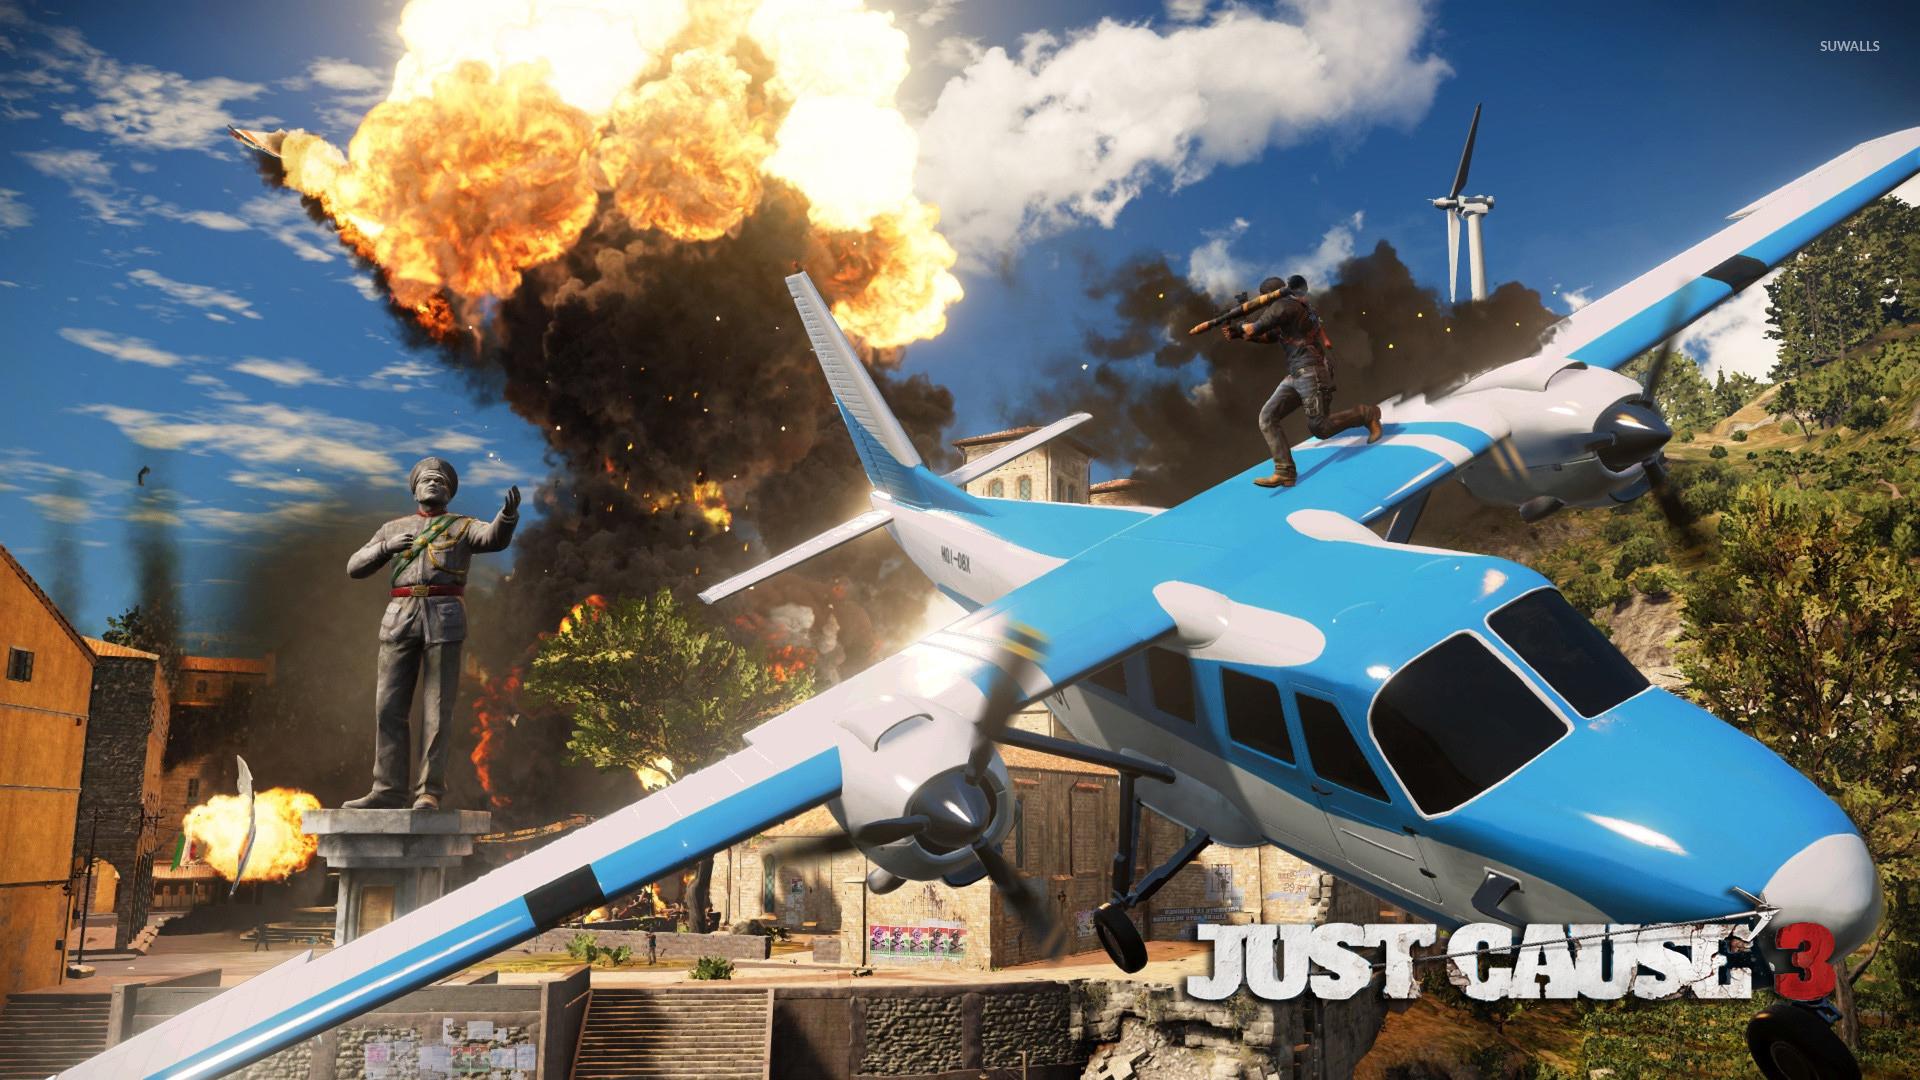 Just Cause 3 Soldier On The Plane Wallpaper Wallpaper